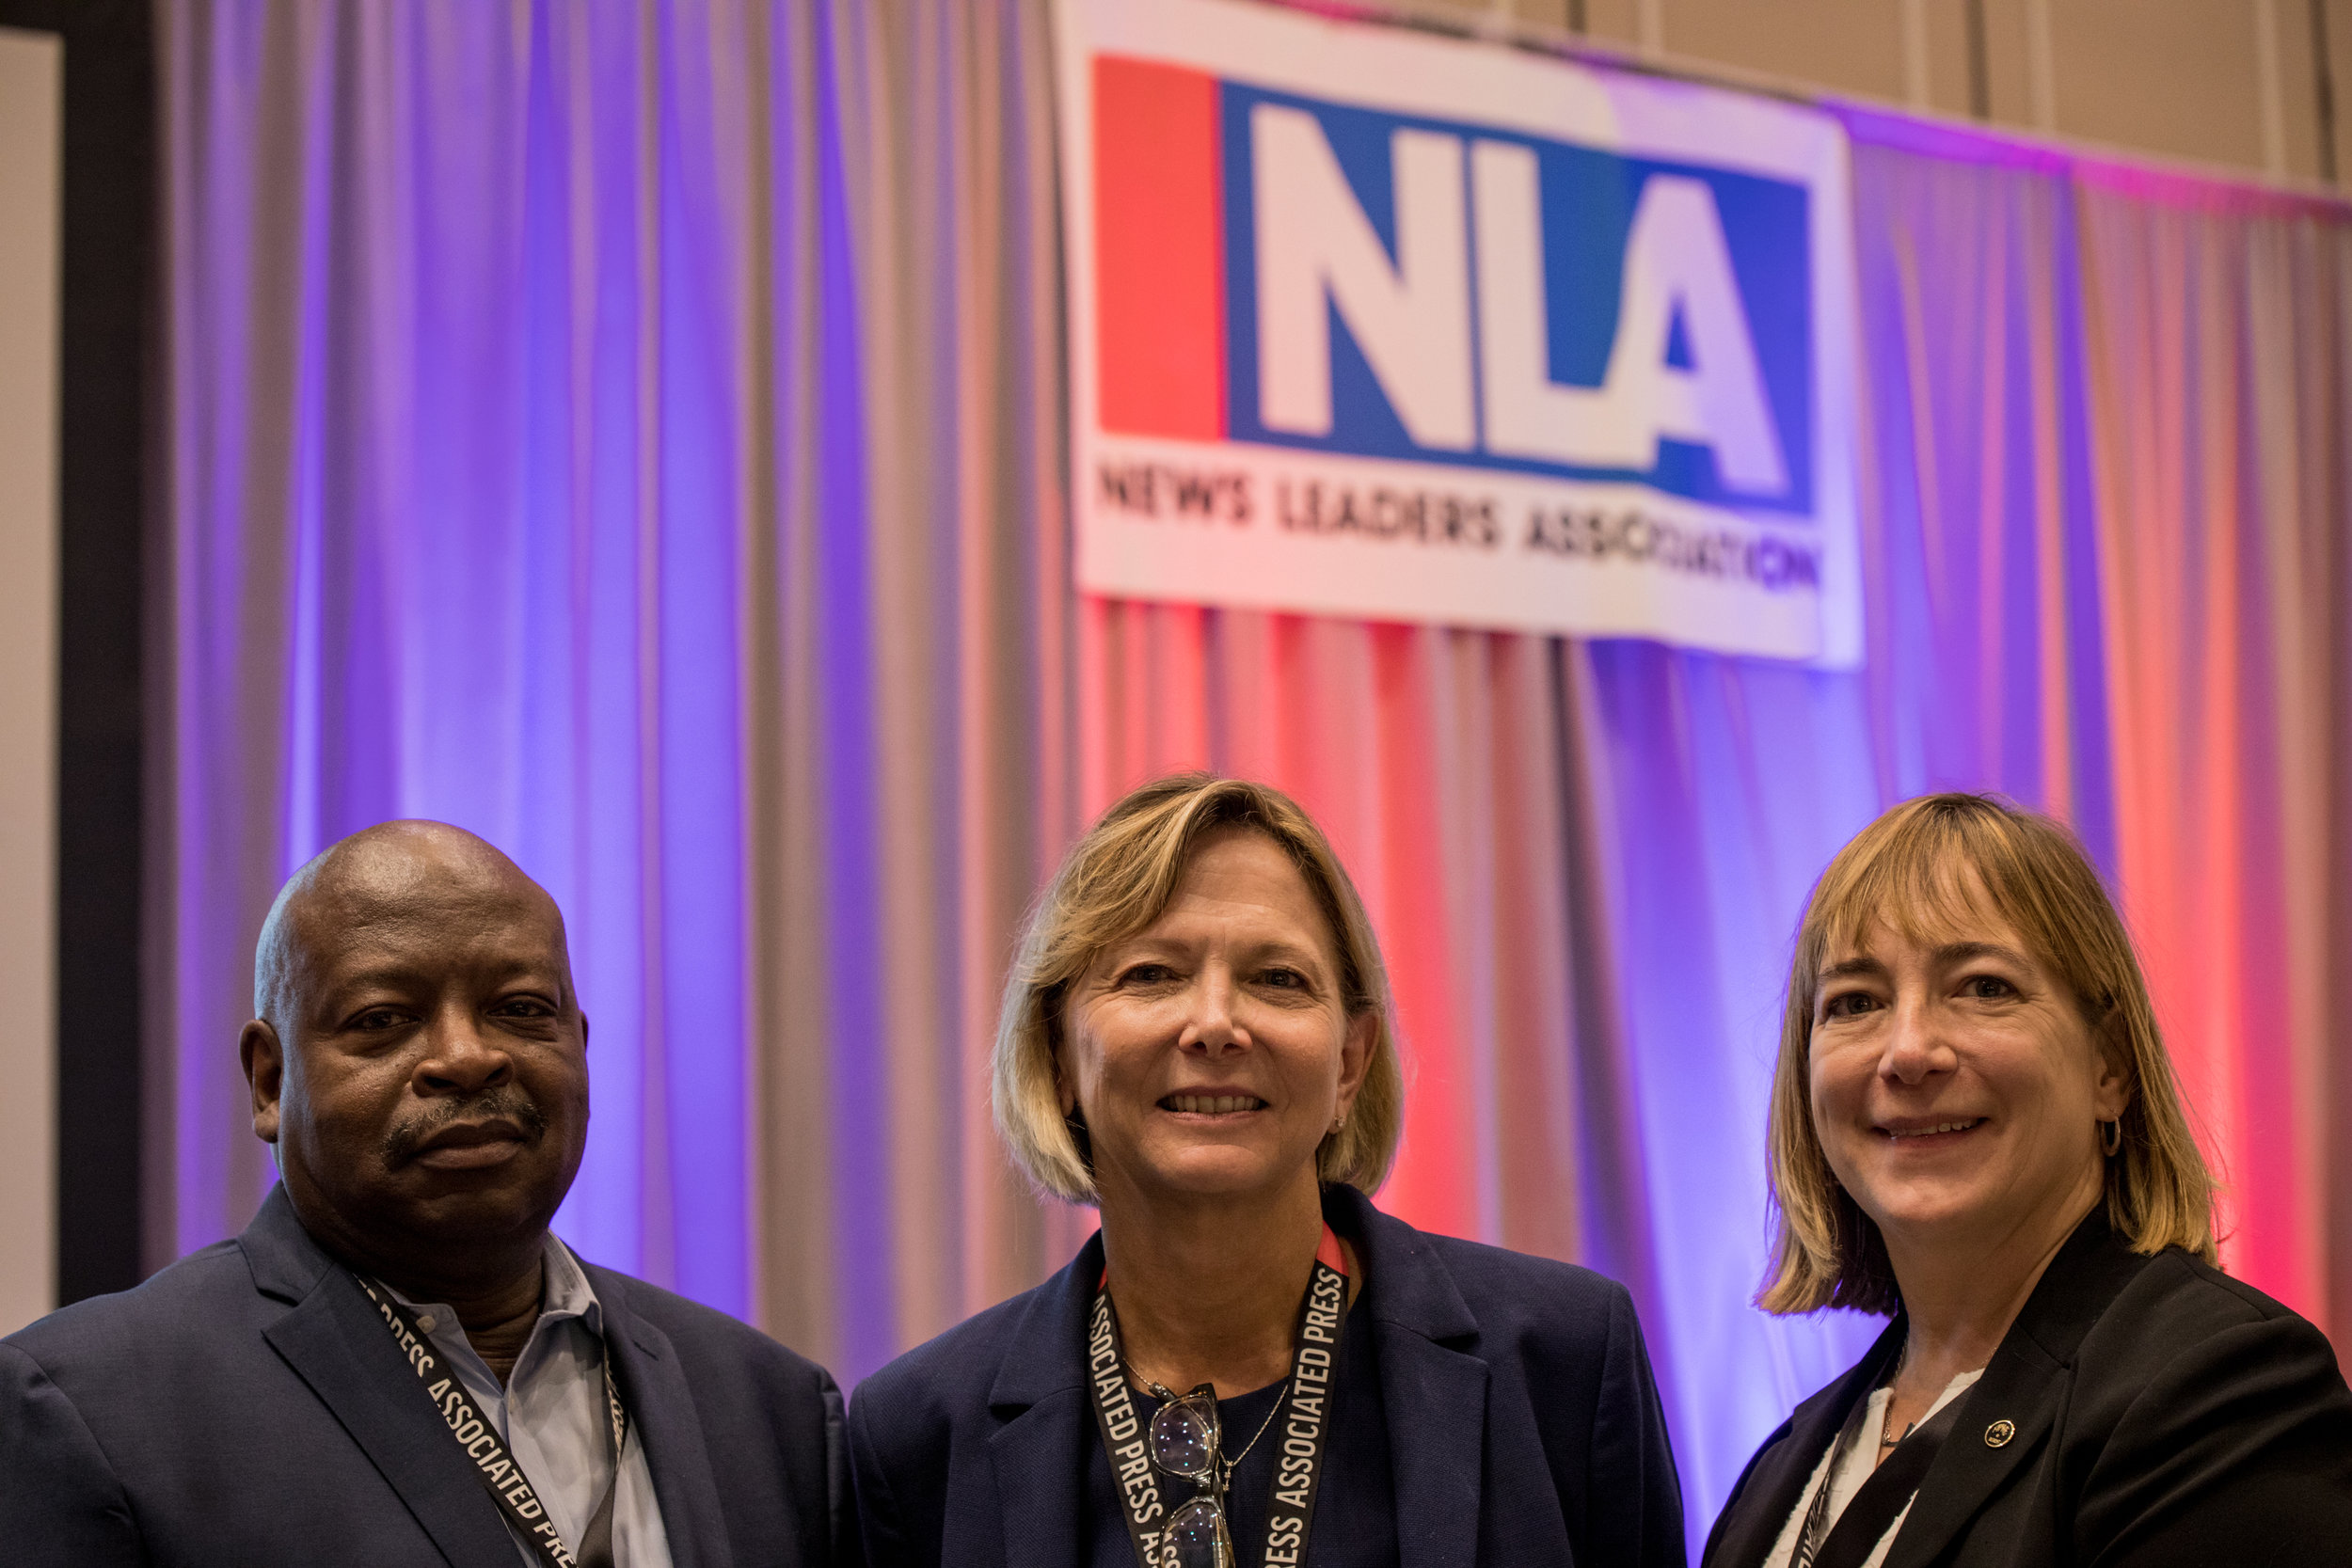  Nancy Barnes, Angie Muhs and Michael Days at the NLA Conference Opening.  Photo Courtesy: Eric Pritchett  